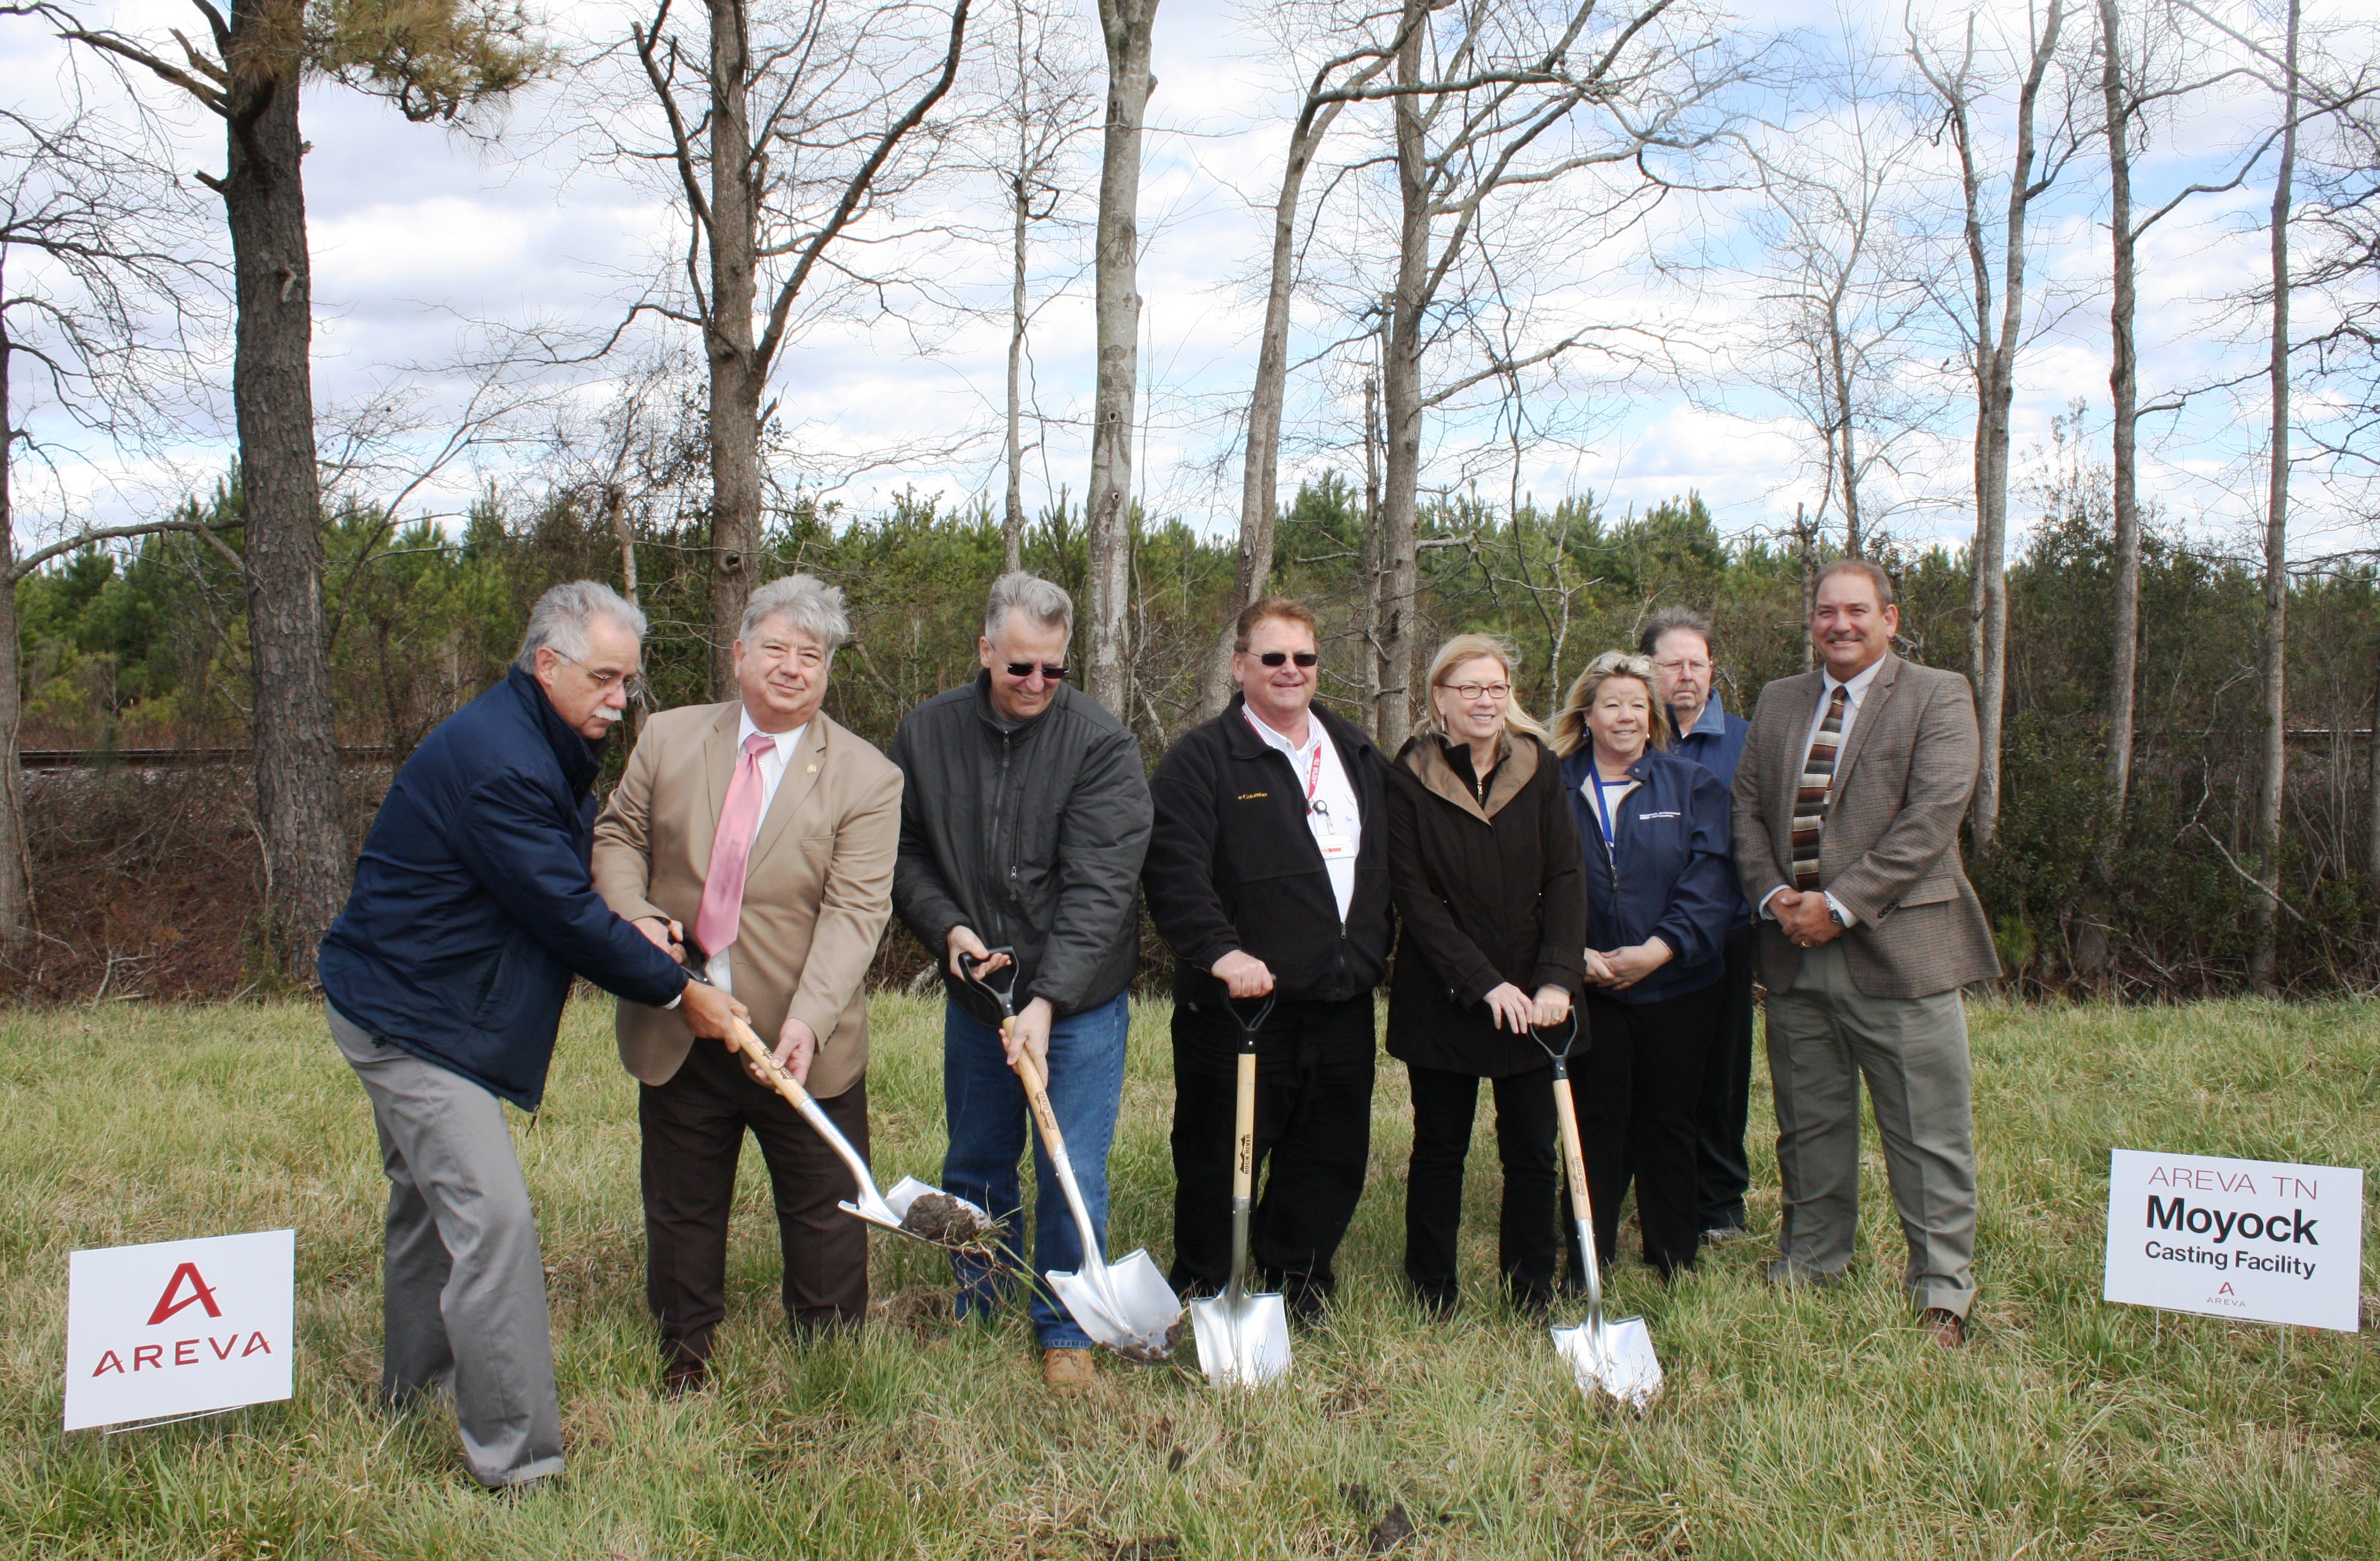 Moyock Casting Facility Breaks Ground in Currituck, NC